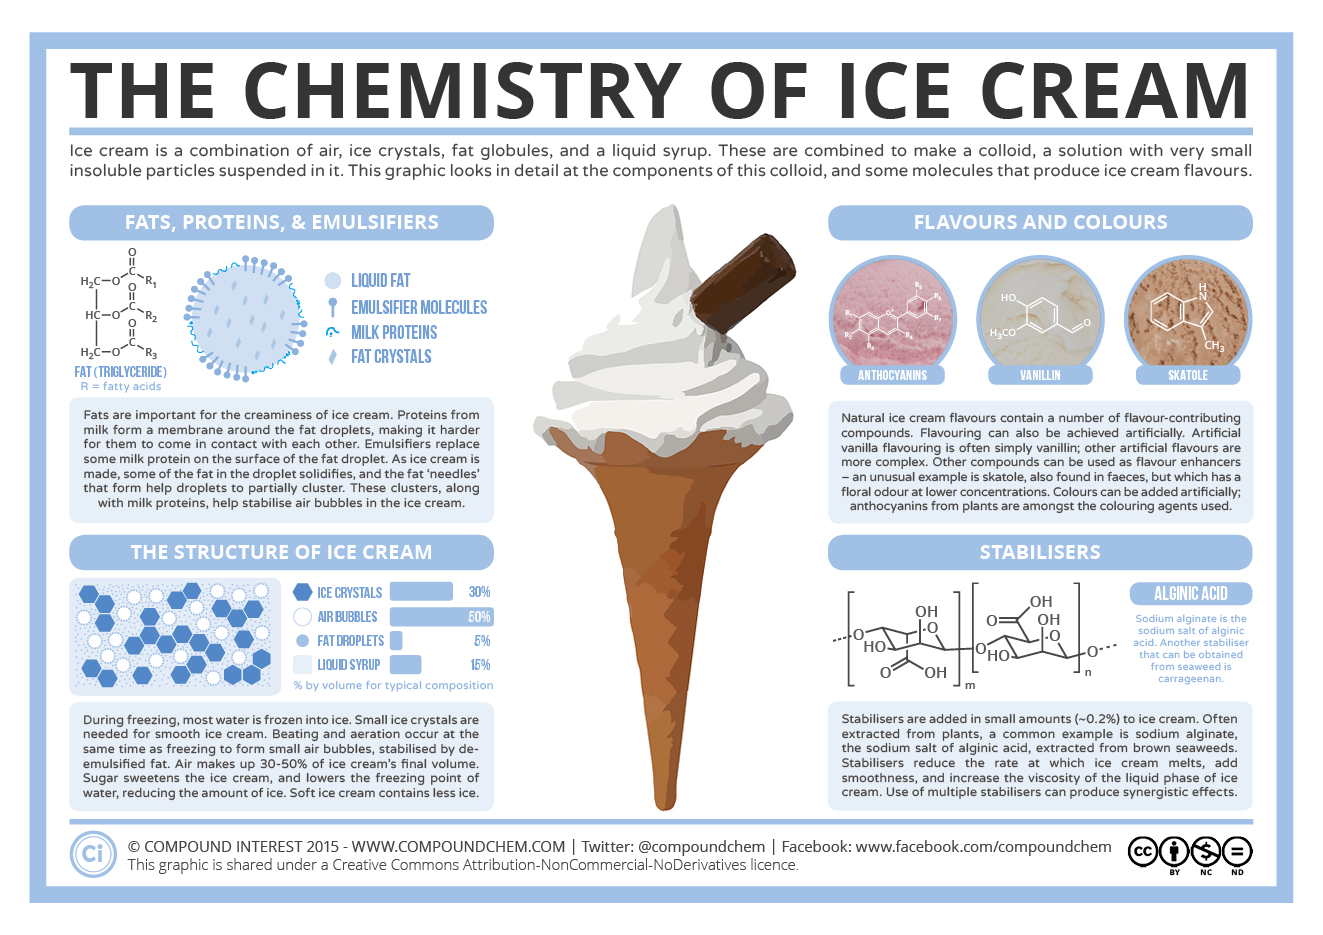 When An Ice Cream Melts, Its State of Matter Changes